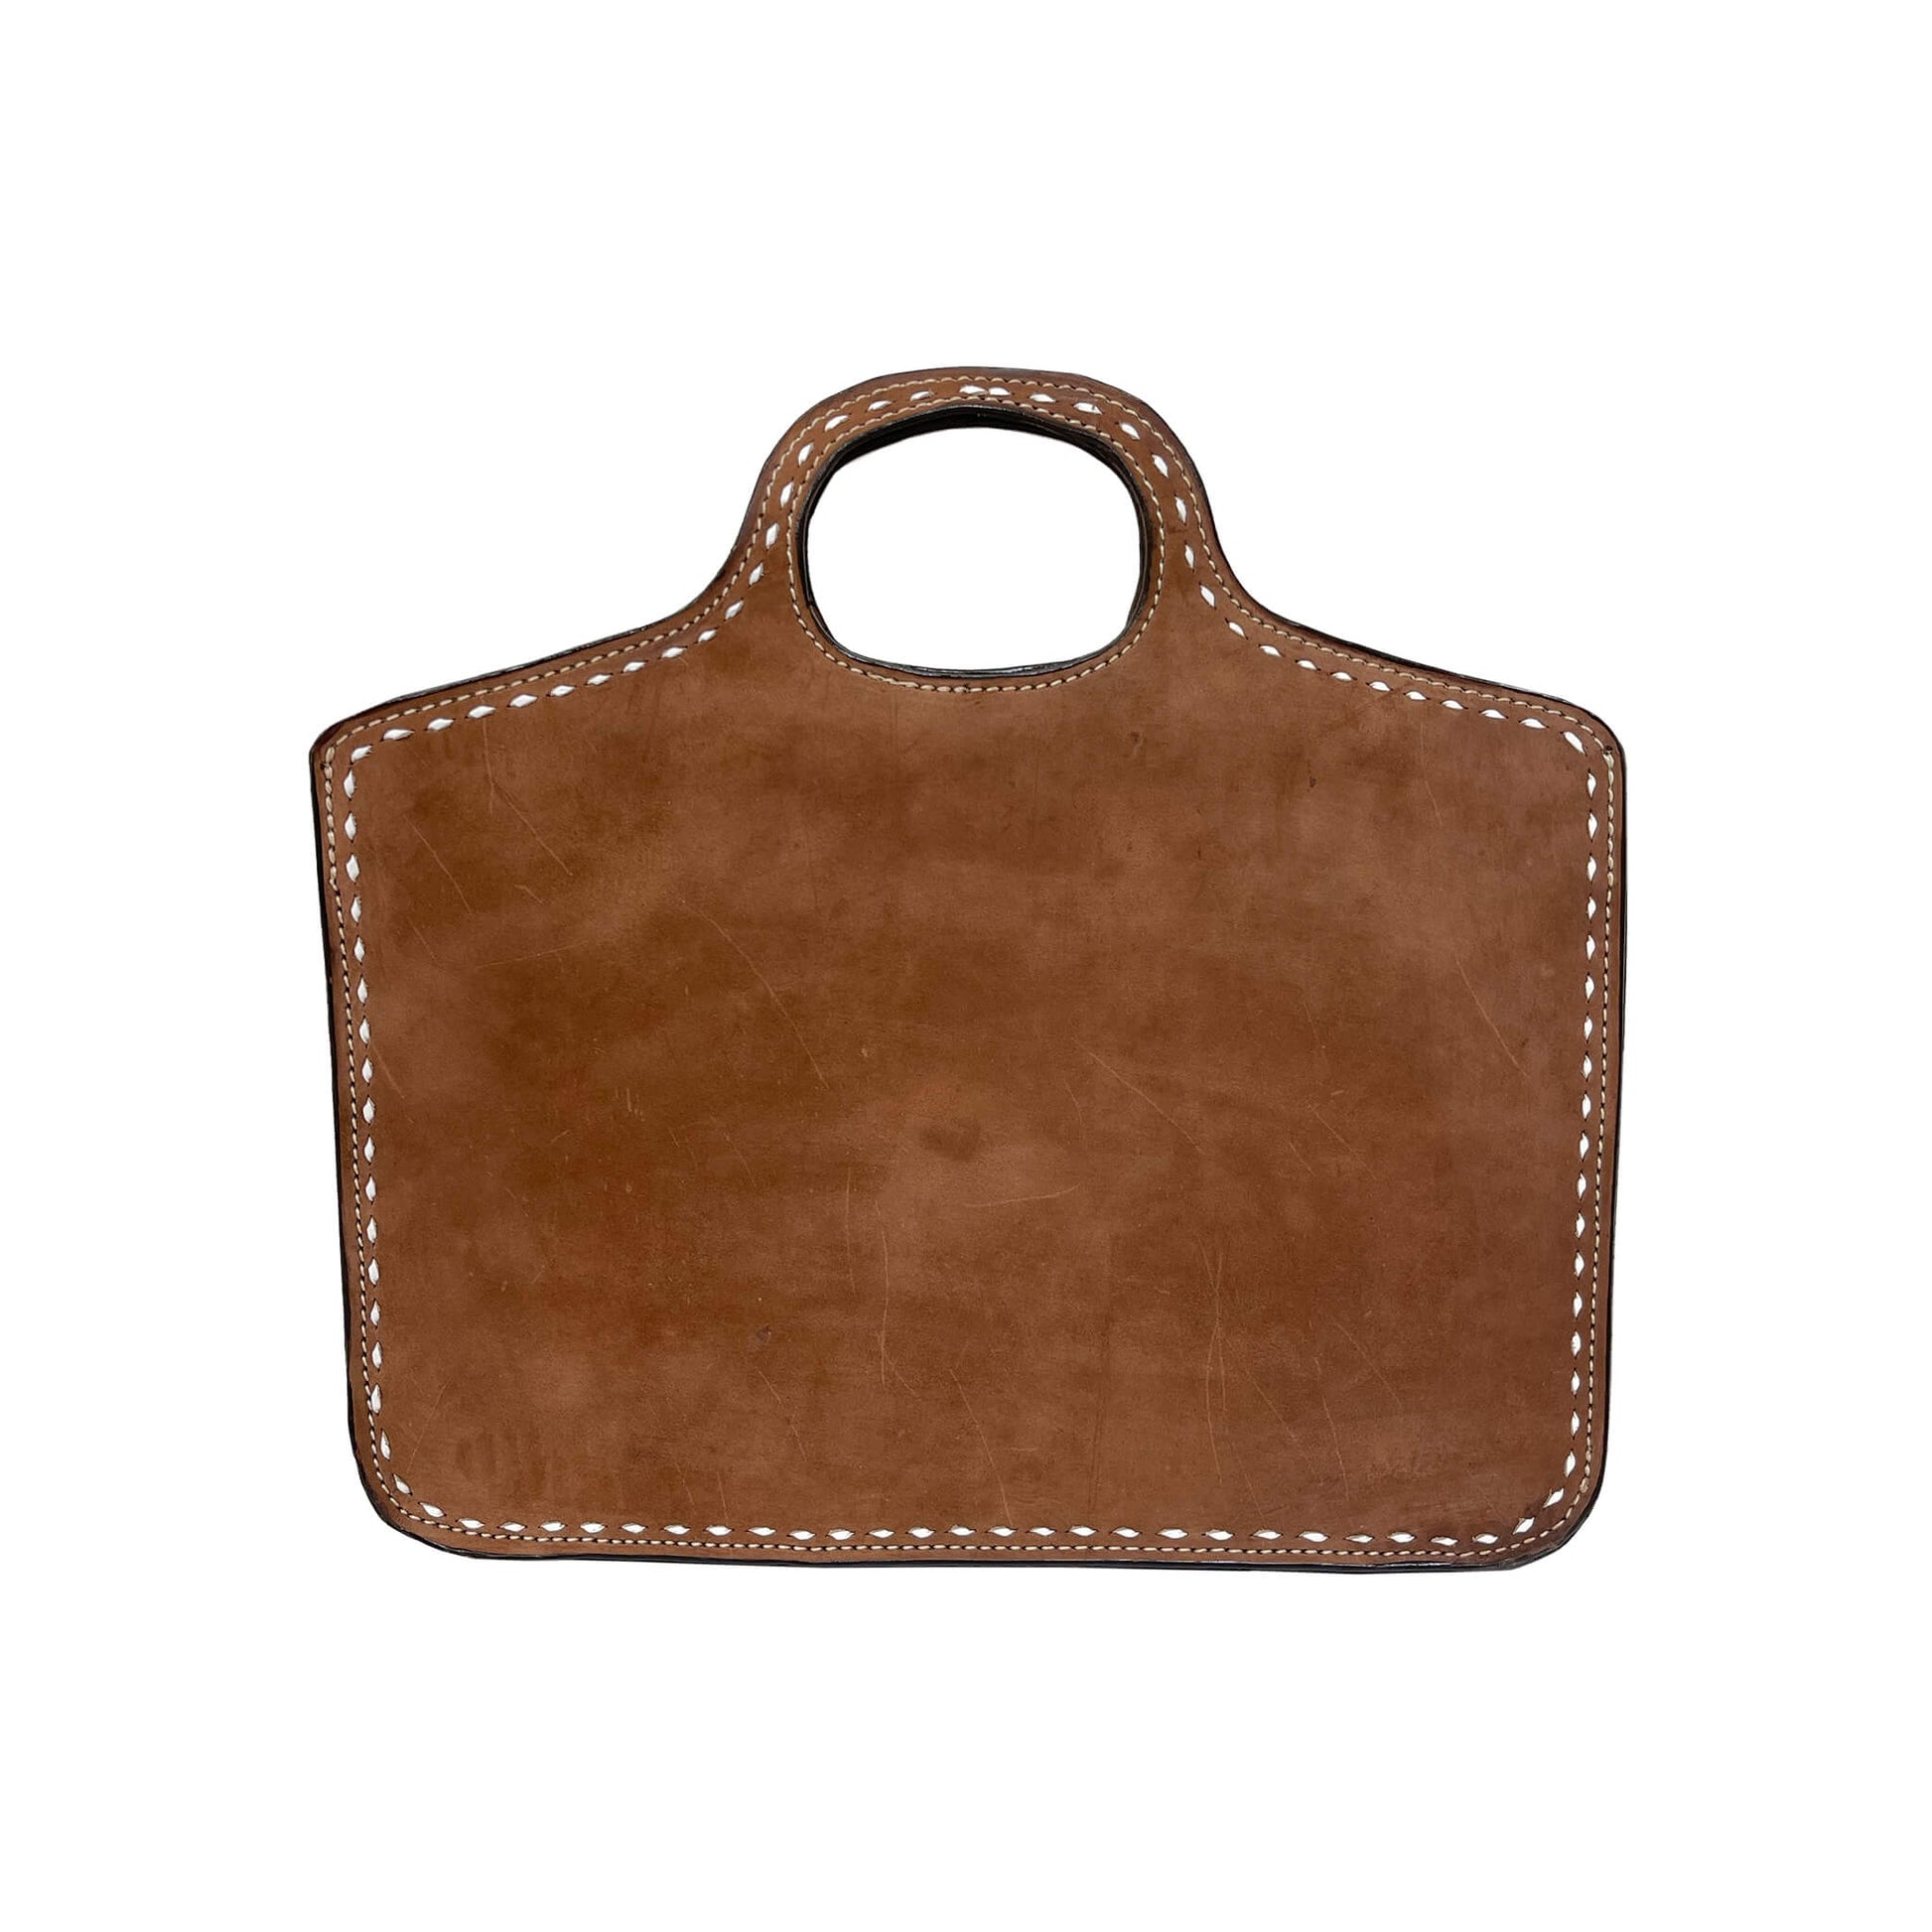 Traveling Cowboy rough out chocolate leather with white buckstitch.